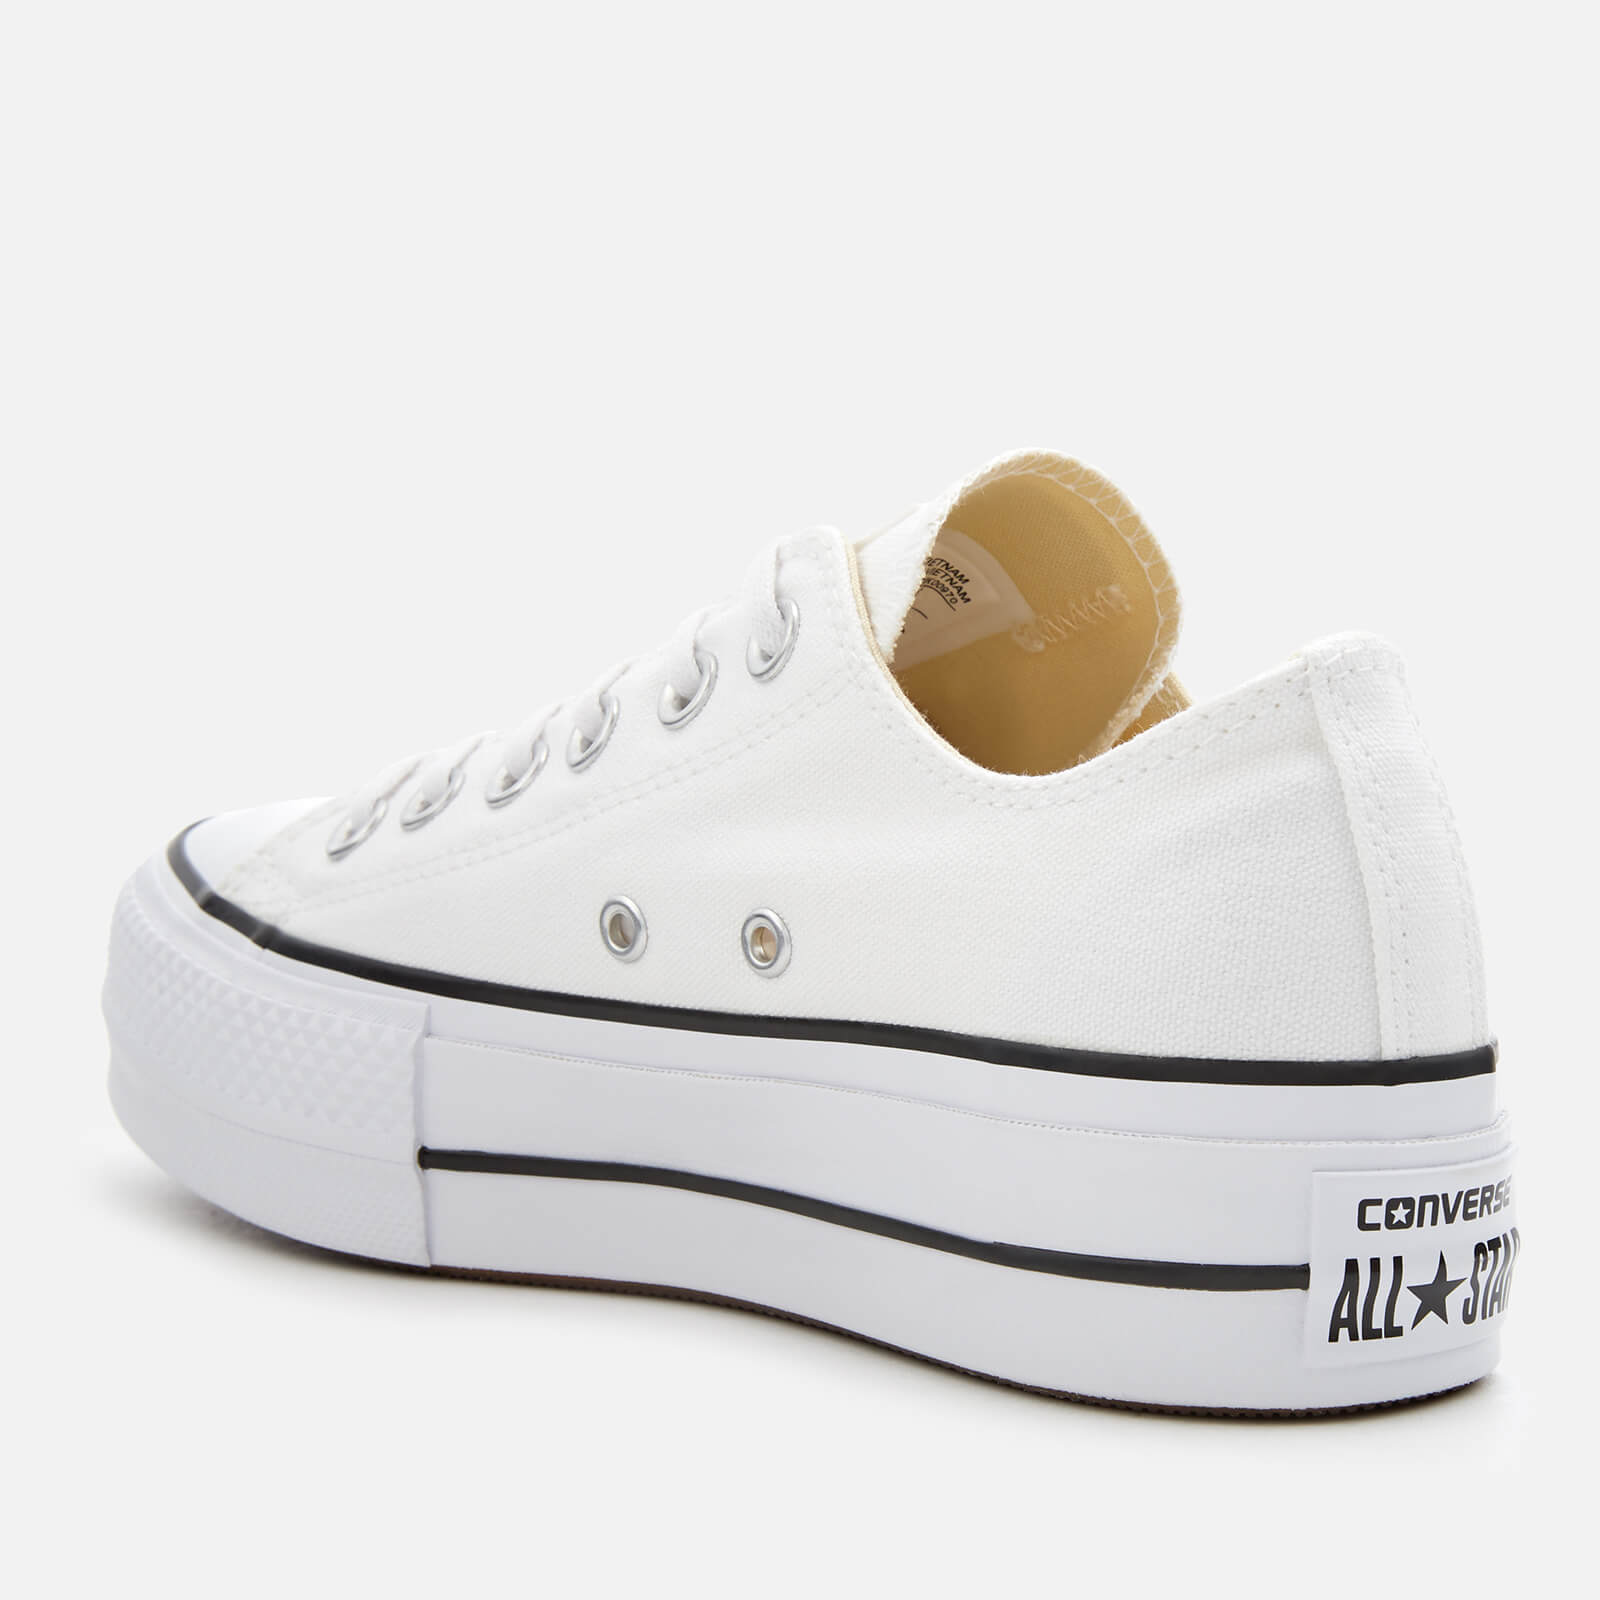 Converse Women's Chuck Taylor All Star Lift Ox Trainers - White/Black/White - UK 3